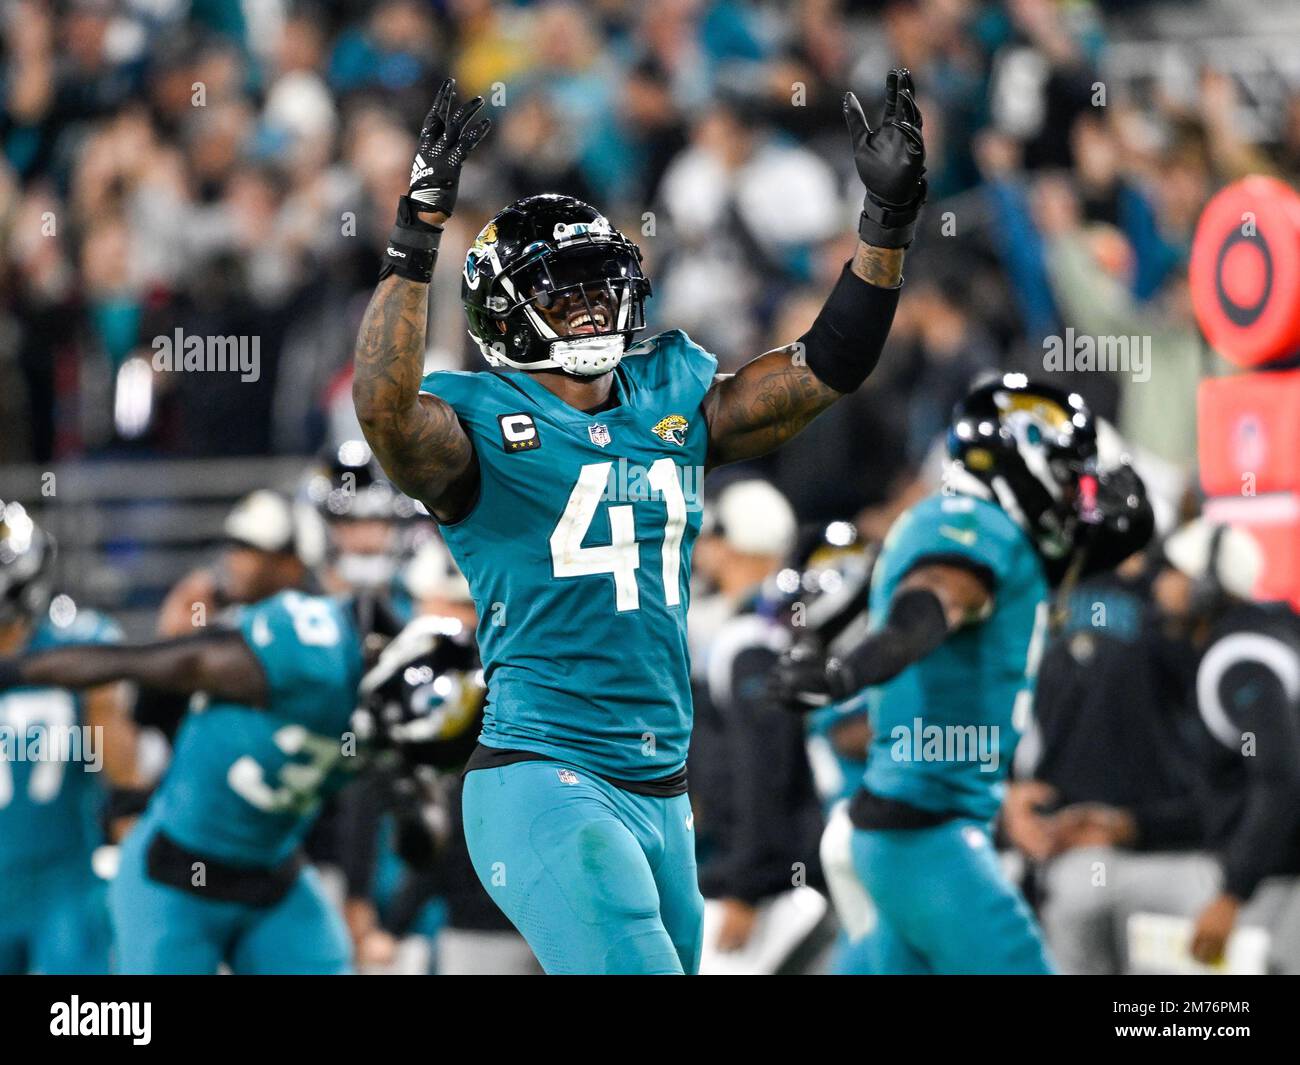 Jacksonville, FL, USA. 7th Jan, 2023. Jacksonville Jaguars linebacker Josh Allen (41) reacts after the Jacksonville Jaguars defeated the Tennessee Titans 20-16 to win the AFC South Division in Jacksonville, FL. Romeo T Guzman/CSM/Alamy Live News Stock Photo